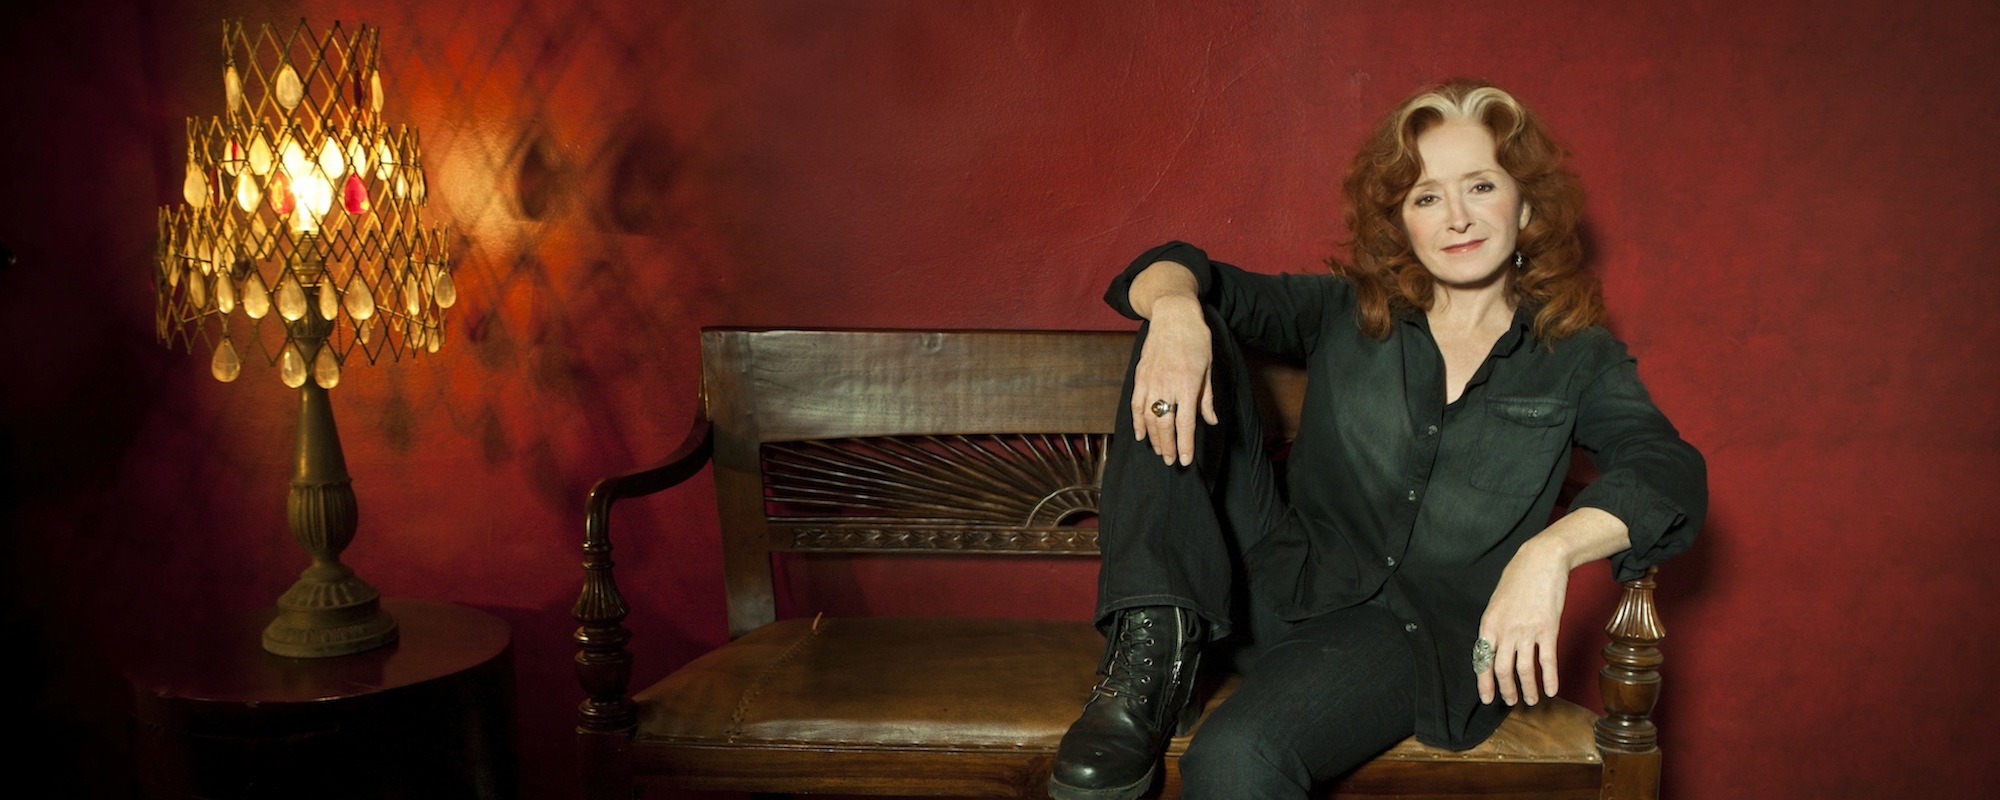 Bonnie Raitt Performs New Single, “Made Up Mind,” From Forthcoming LP on ‘Jimmy Kimmel Live’